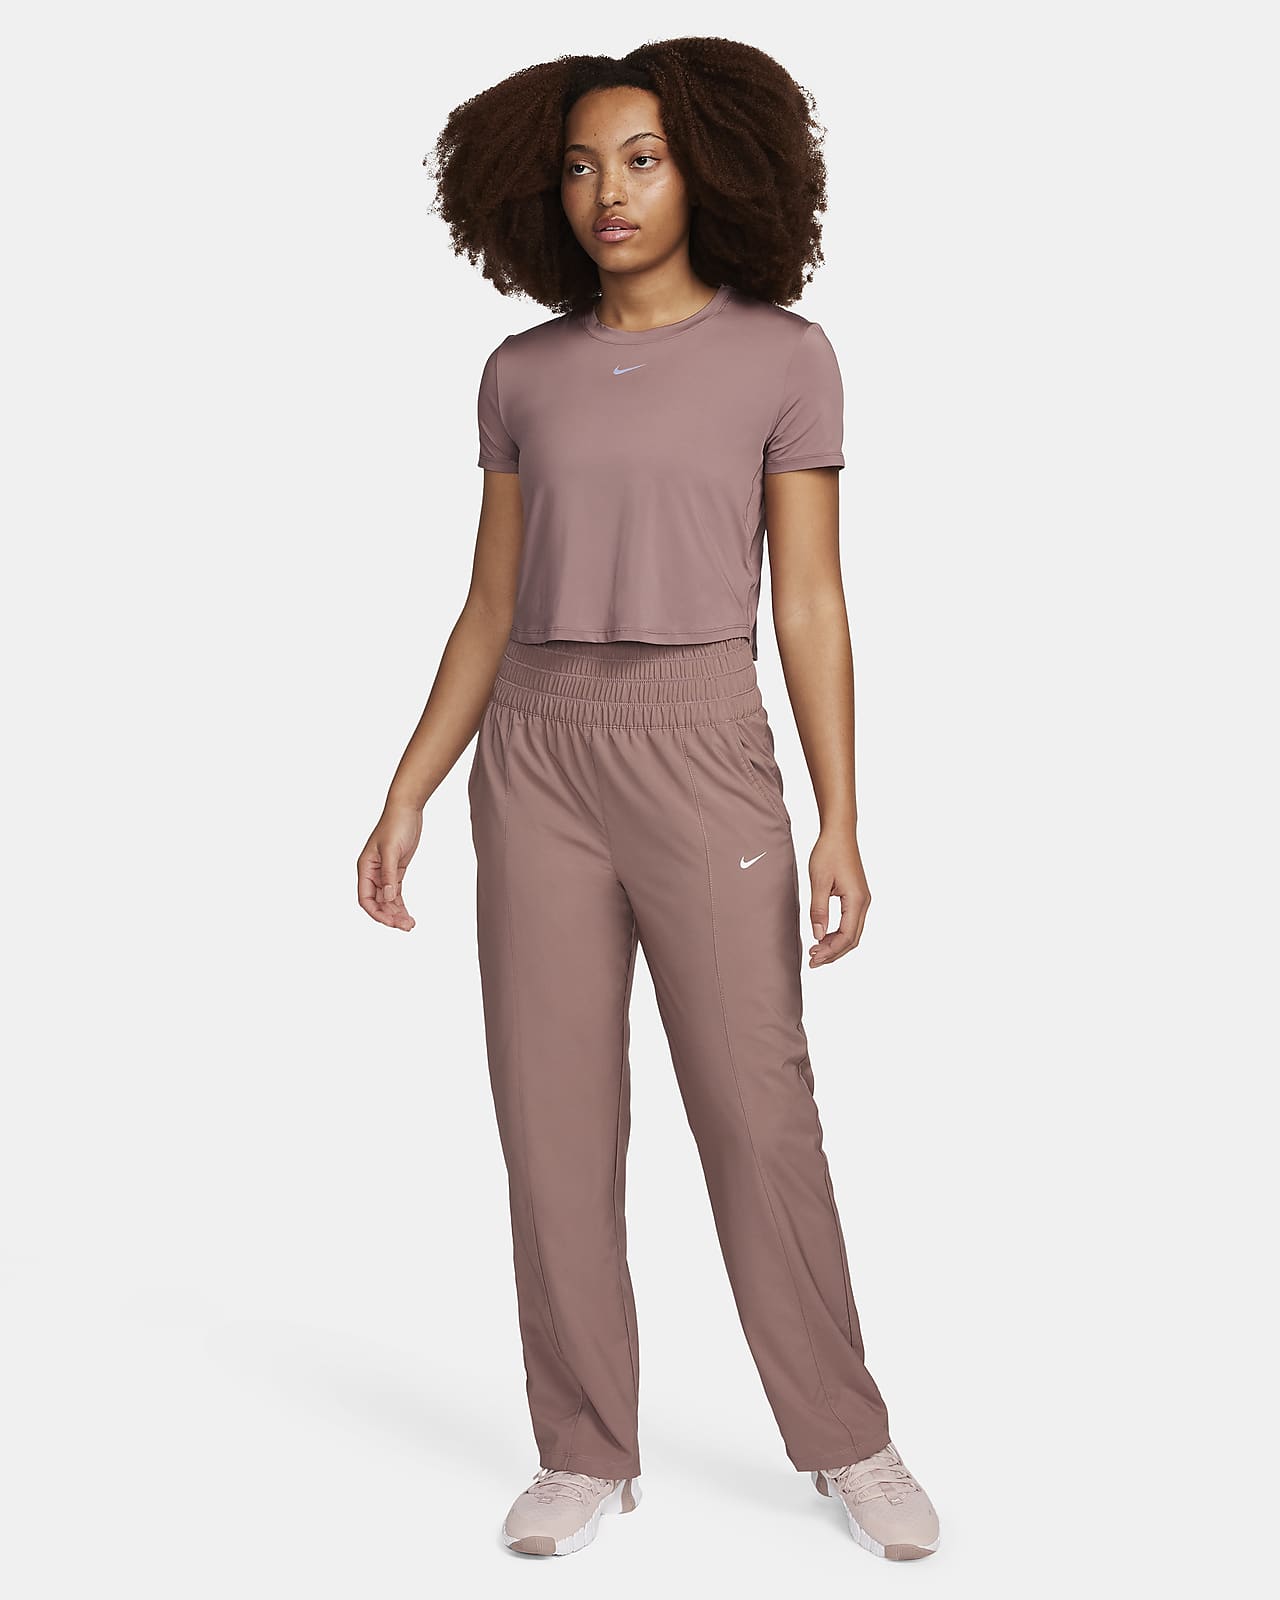 Casual Pants for Women - Buy Girl Pants for Daily Wear | ONLY